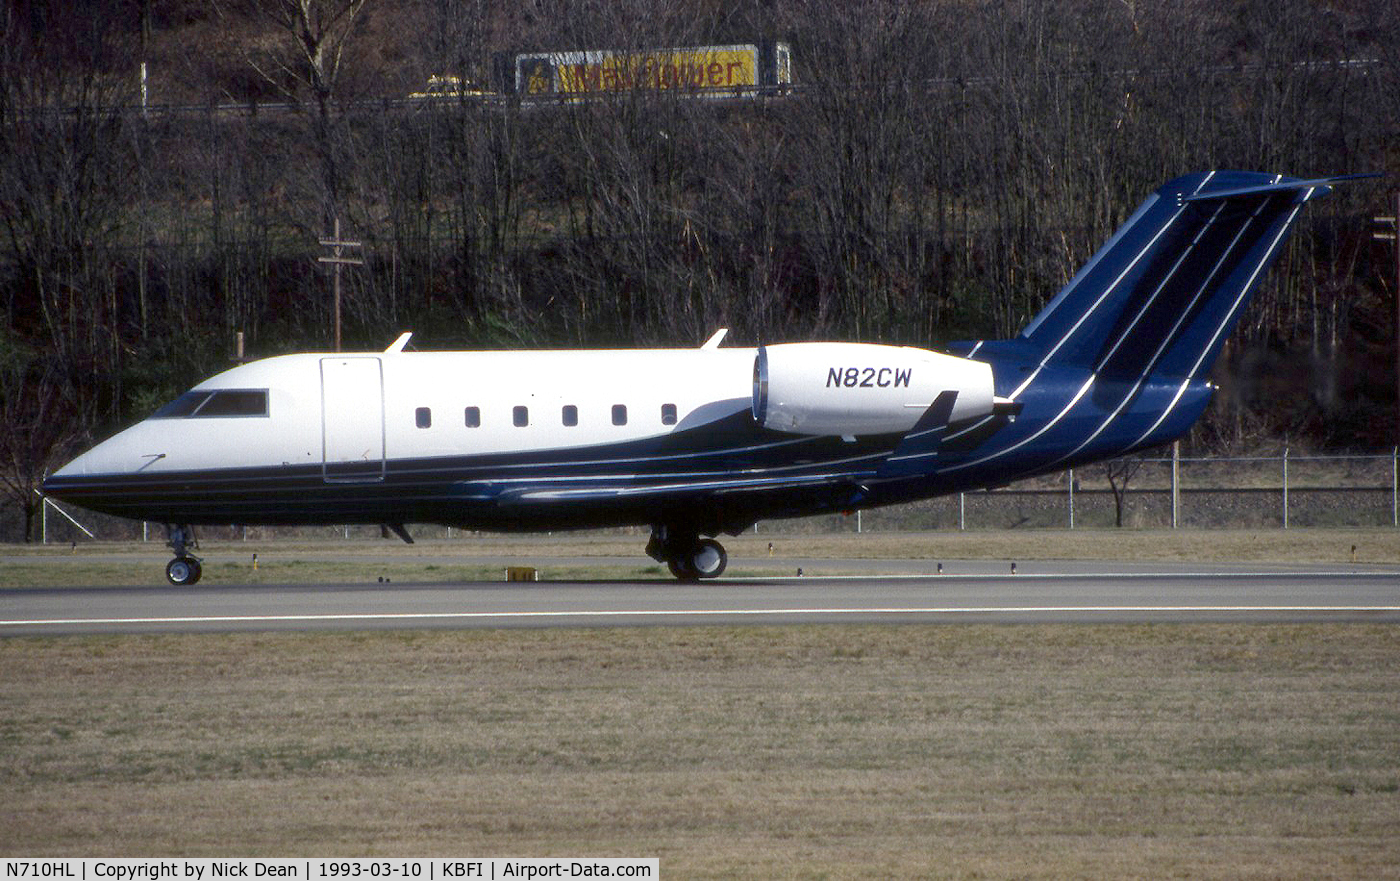 N710HL, 1982 Canadair Challenger 600 (CL-600-1A11) C/N 1050, KBFI (The original N82CW seen here was replaced by a CL604 the aircraft shown is now registered as posted N710HL)